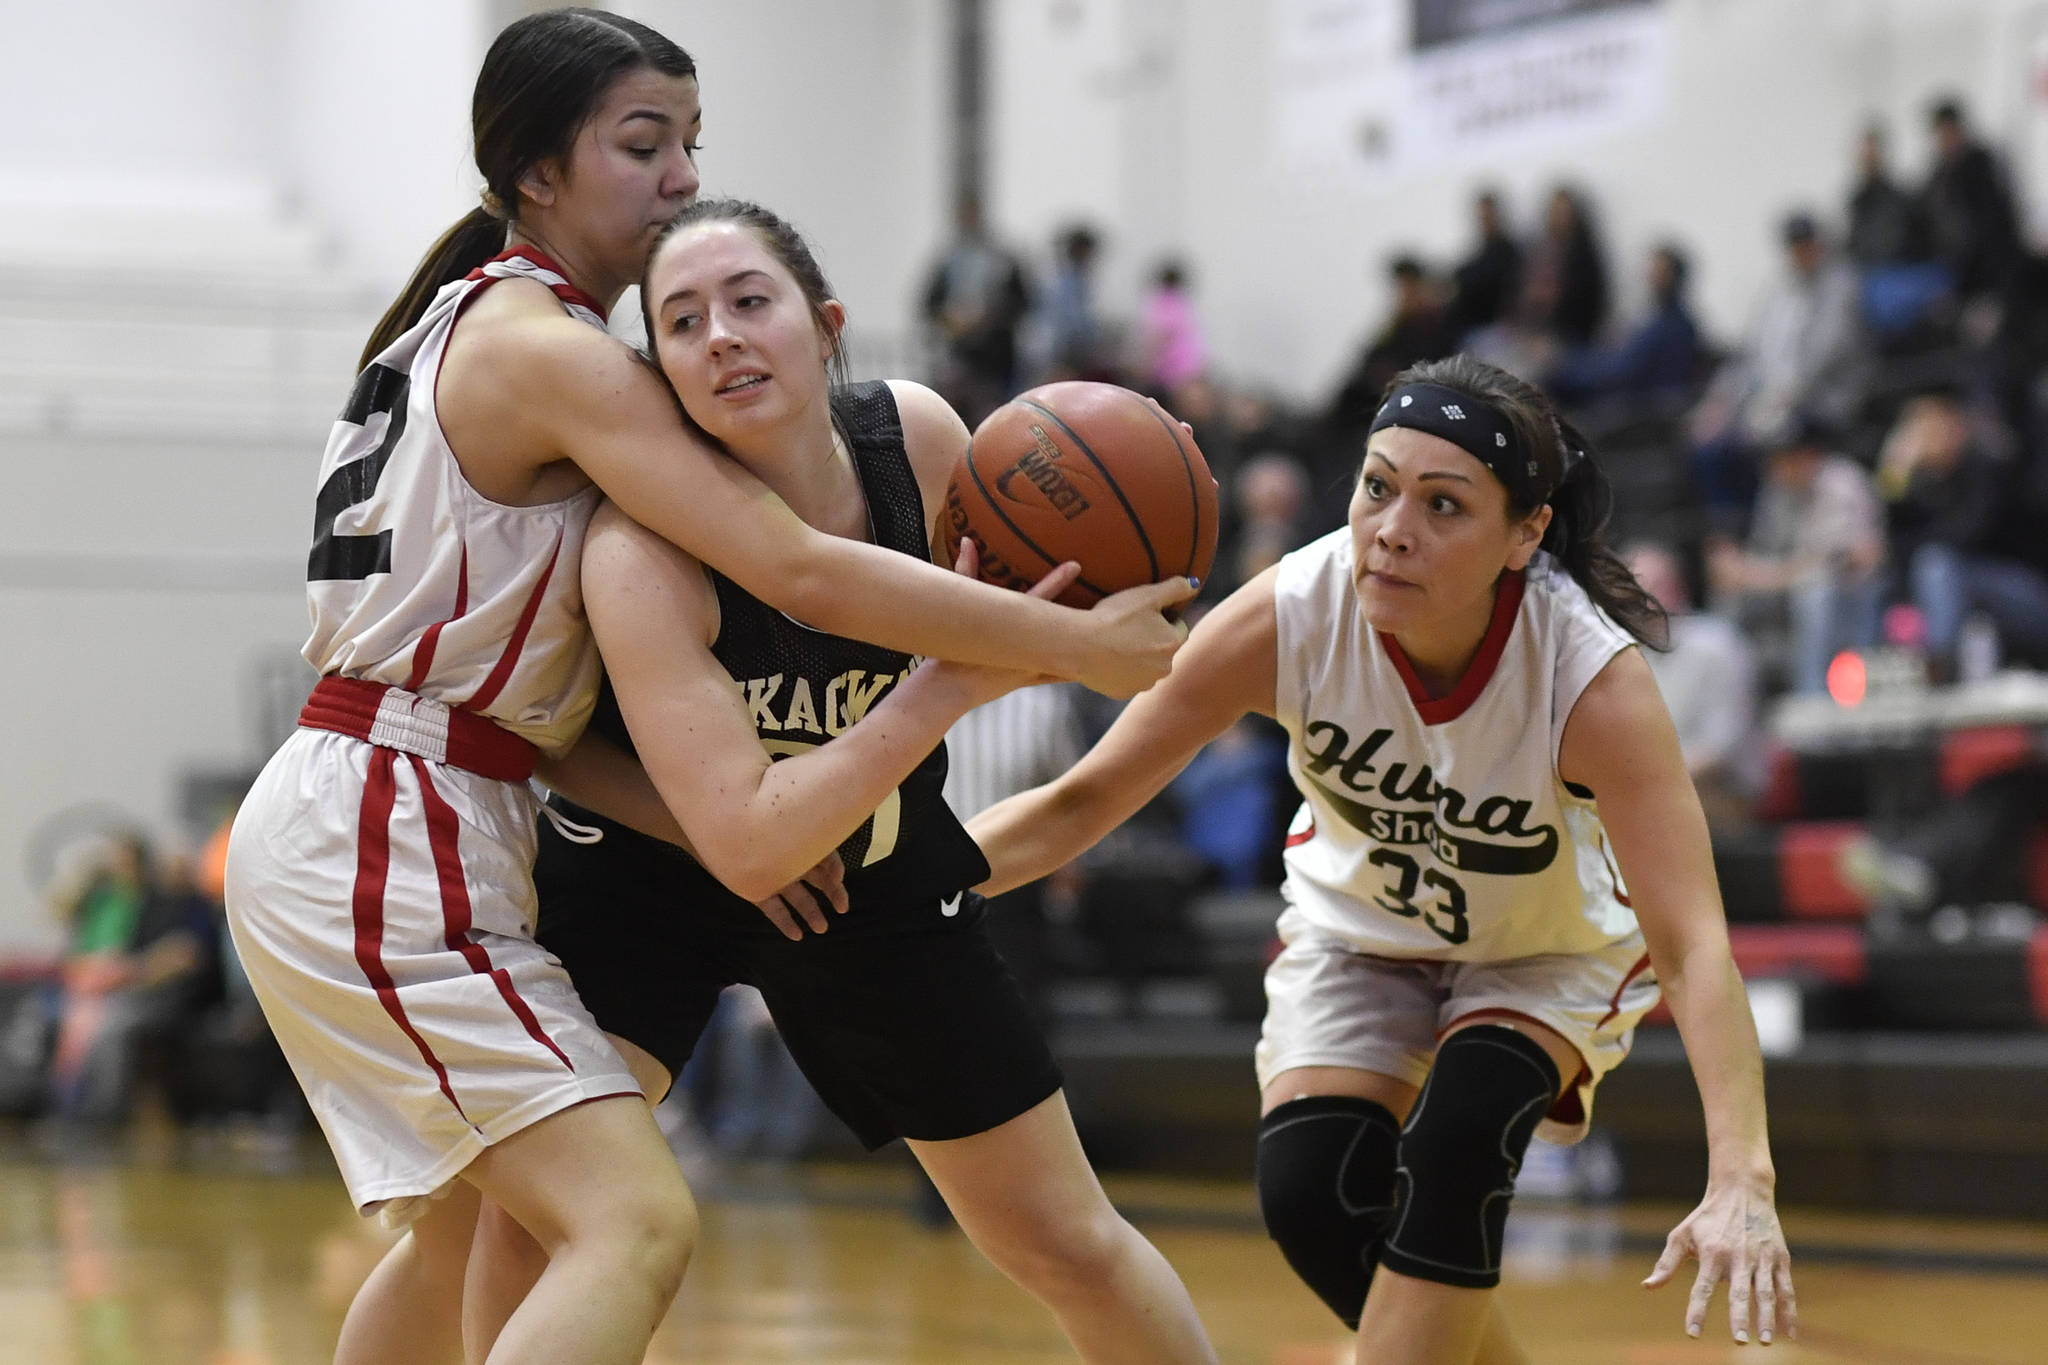 Skagway’s Hailey Jensen, center, is closely guarded by Hoonah’s Ronnie Roberts, left, and Krissy Benn at the Juneau Lions Club 73rd Annual Gold Medal Basketball Tournament at Juneau-Douglas High School: Yadaa.at Kalé on Tuesday, March 19, 2019. Skagway won 80-42. (Michael Penn | Juneau Empire)